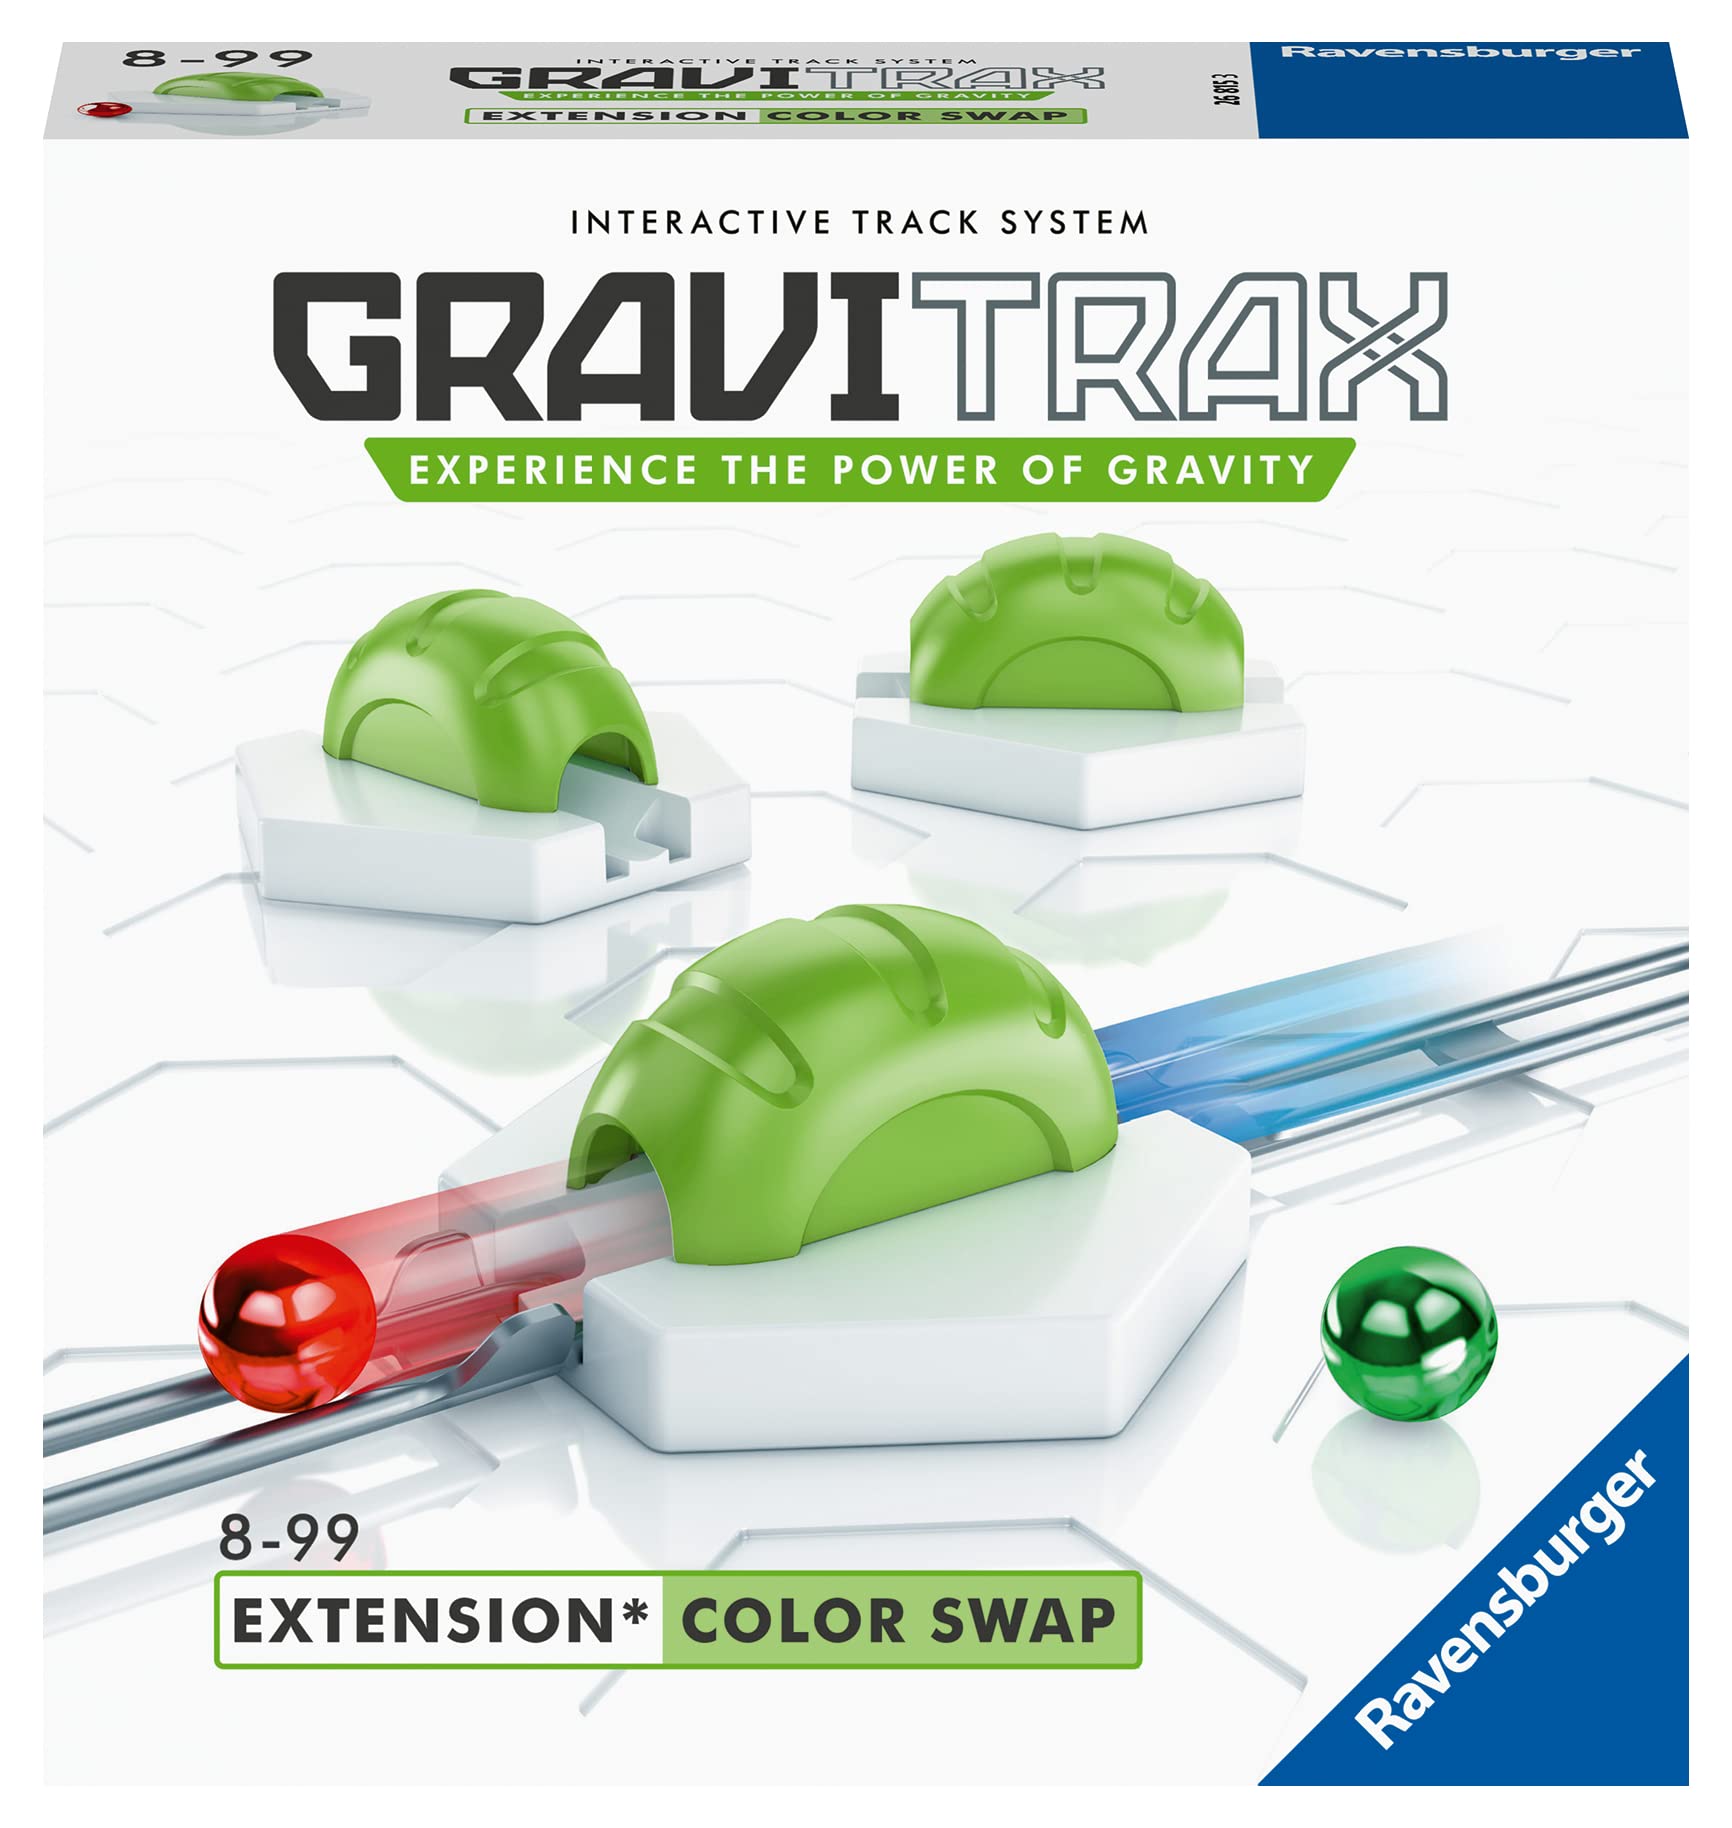 Ravensburger Gravitrax: Color Swap - Marble Run, STEM and Construction Toys for Kids Age 8 Years Up - Kids Gifts